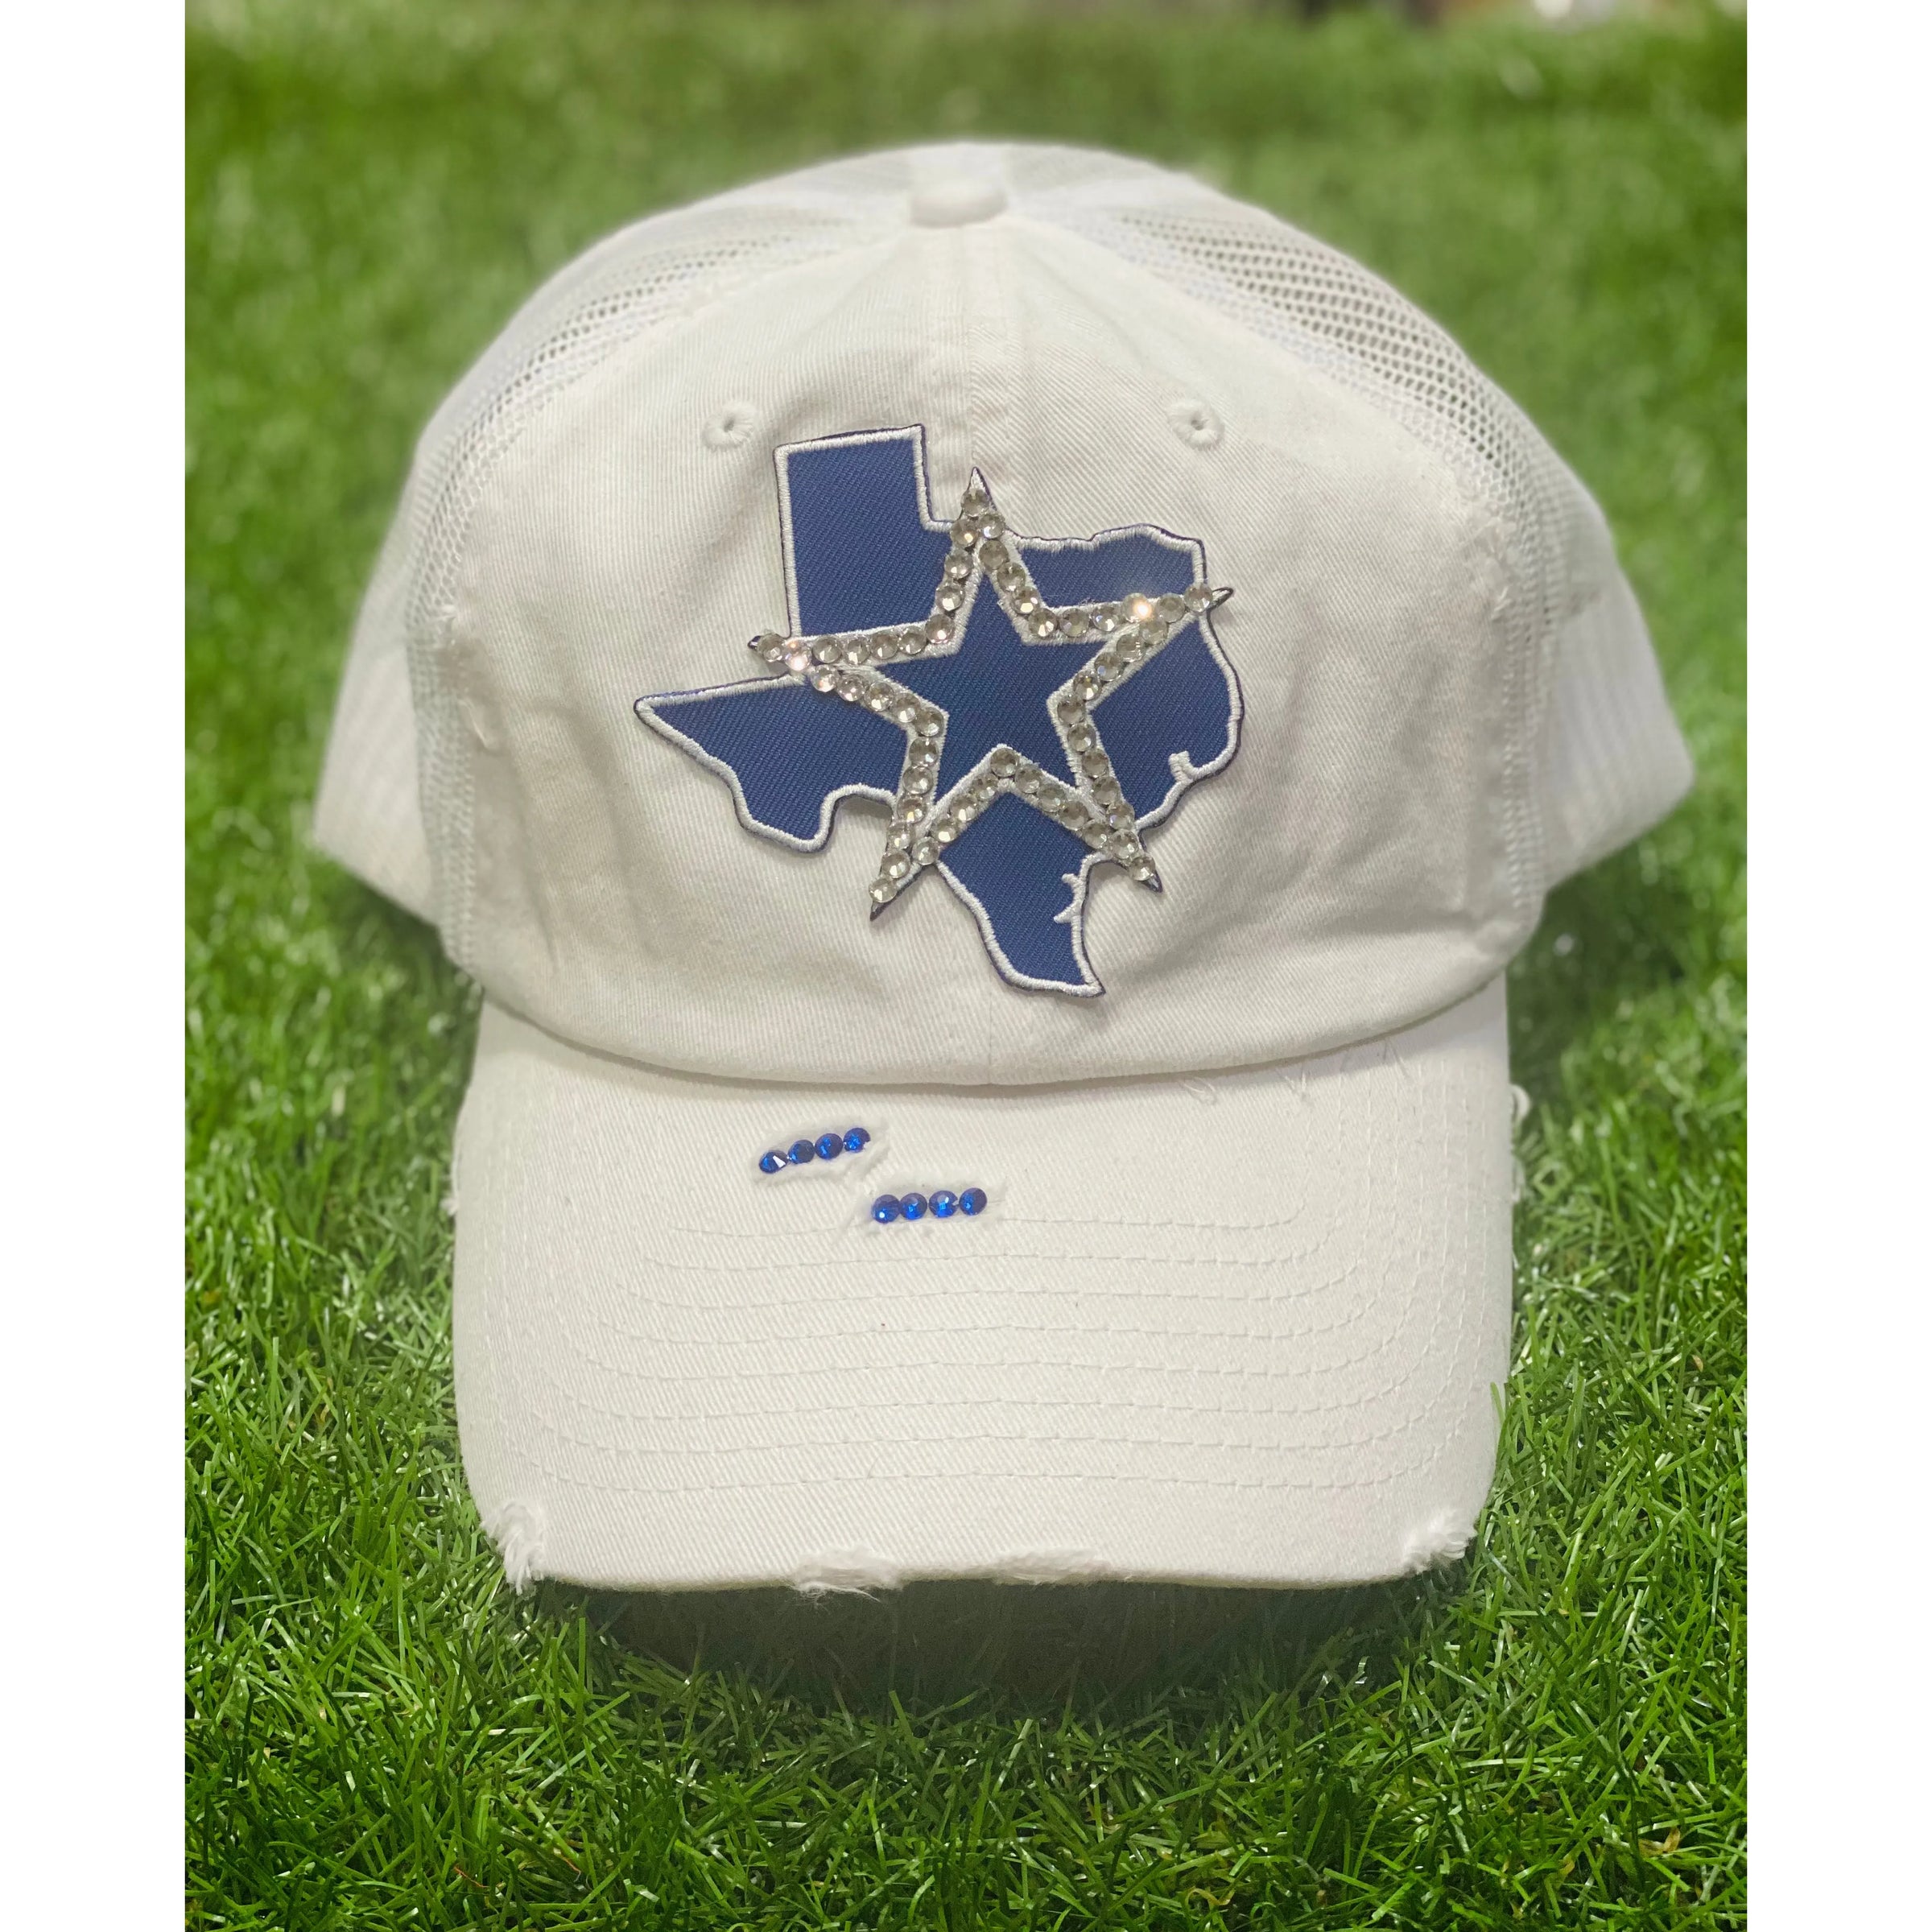 White Distressed Truckers Cap with Embellished Cowboys Emblem